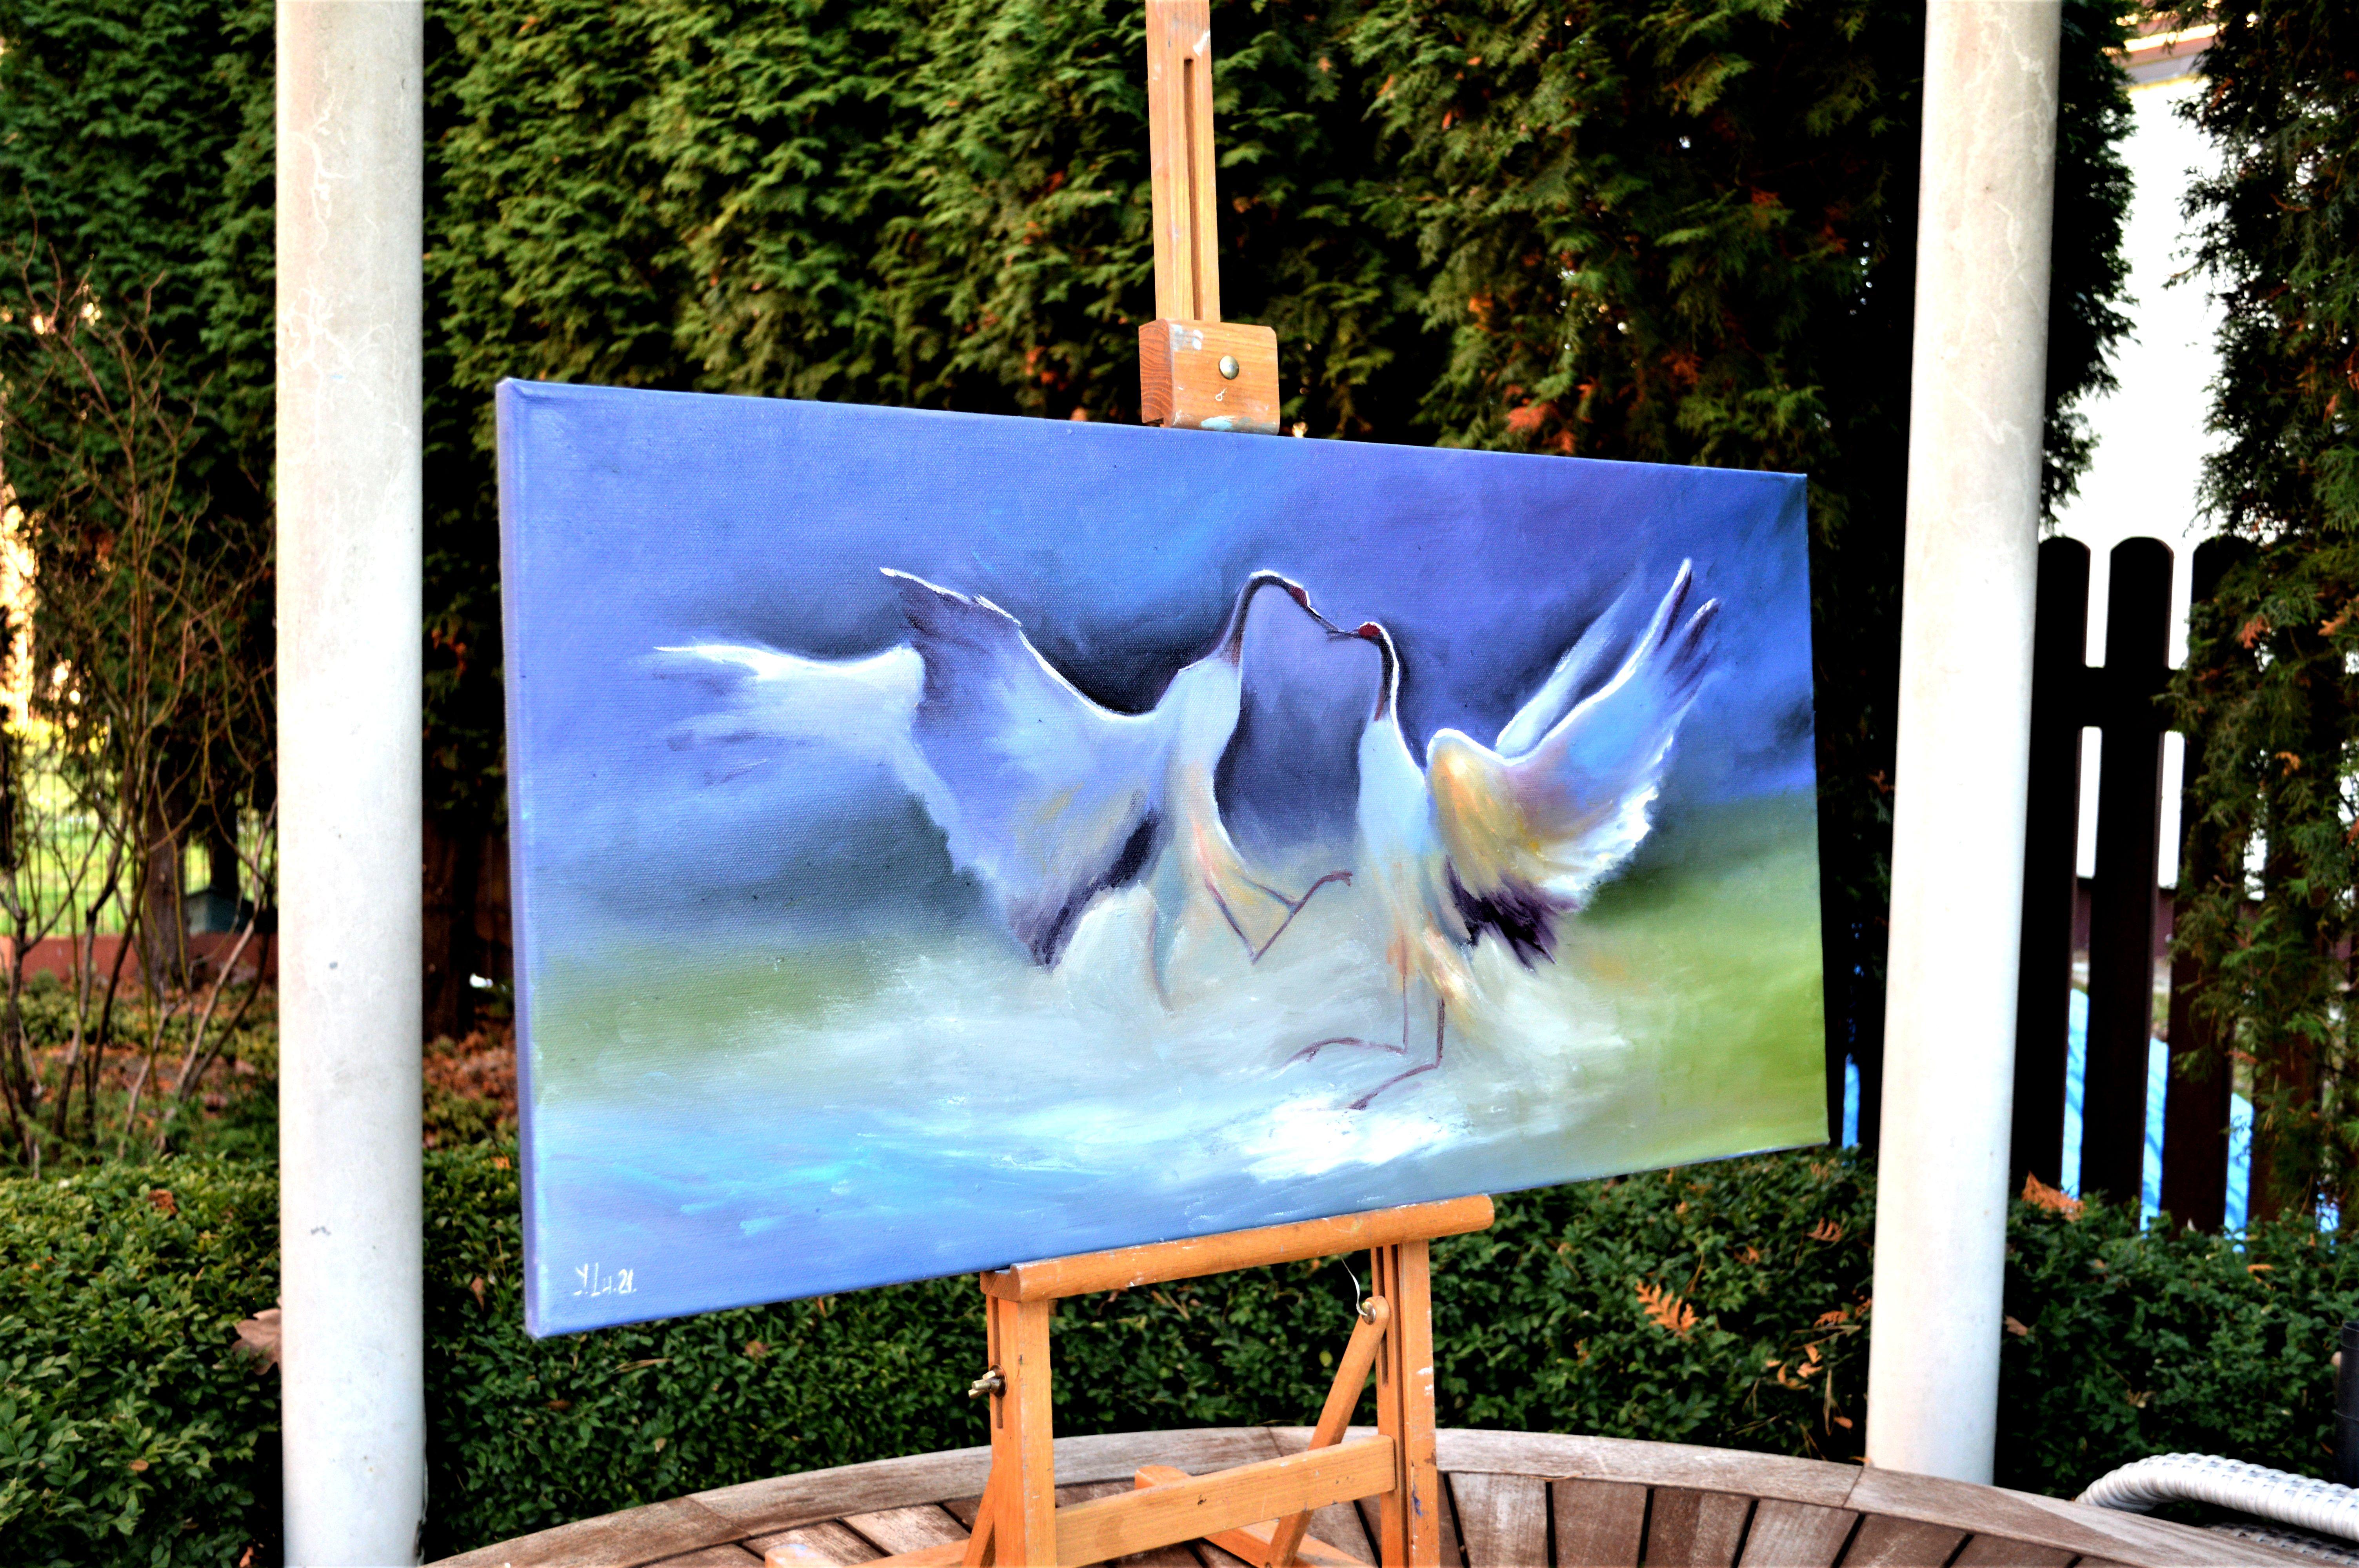 In this oil painting, I've captured an intimate dance of grace and elegance. The natural fluidity of movement and the tender connection between these creatures embody harmony and serenity. Through expressionistic strokes and a palette that whispers